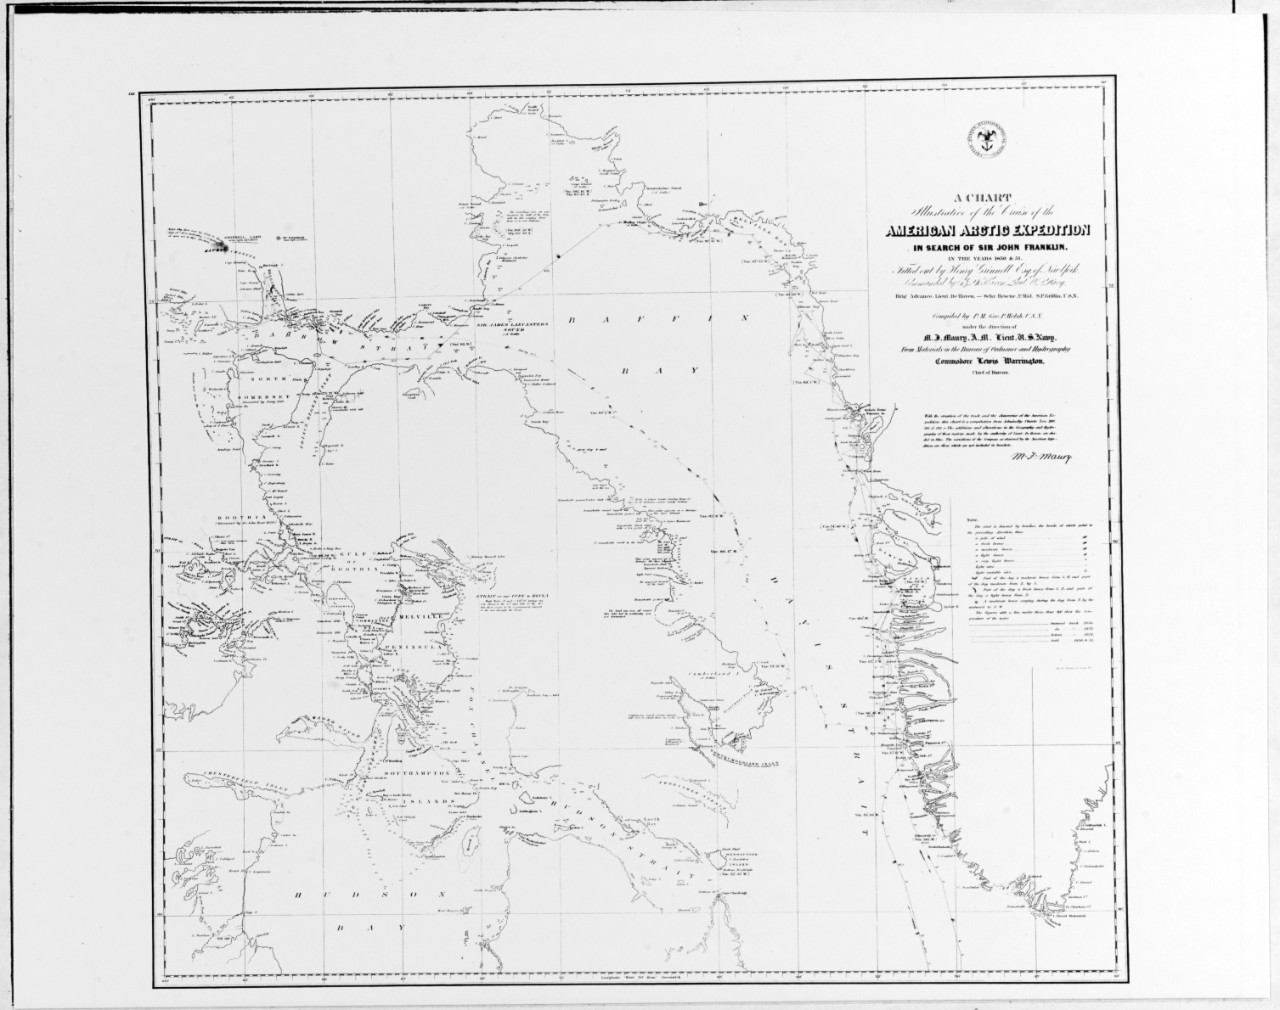 Chart of American Arctic Expedition